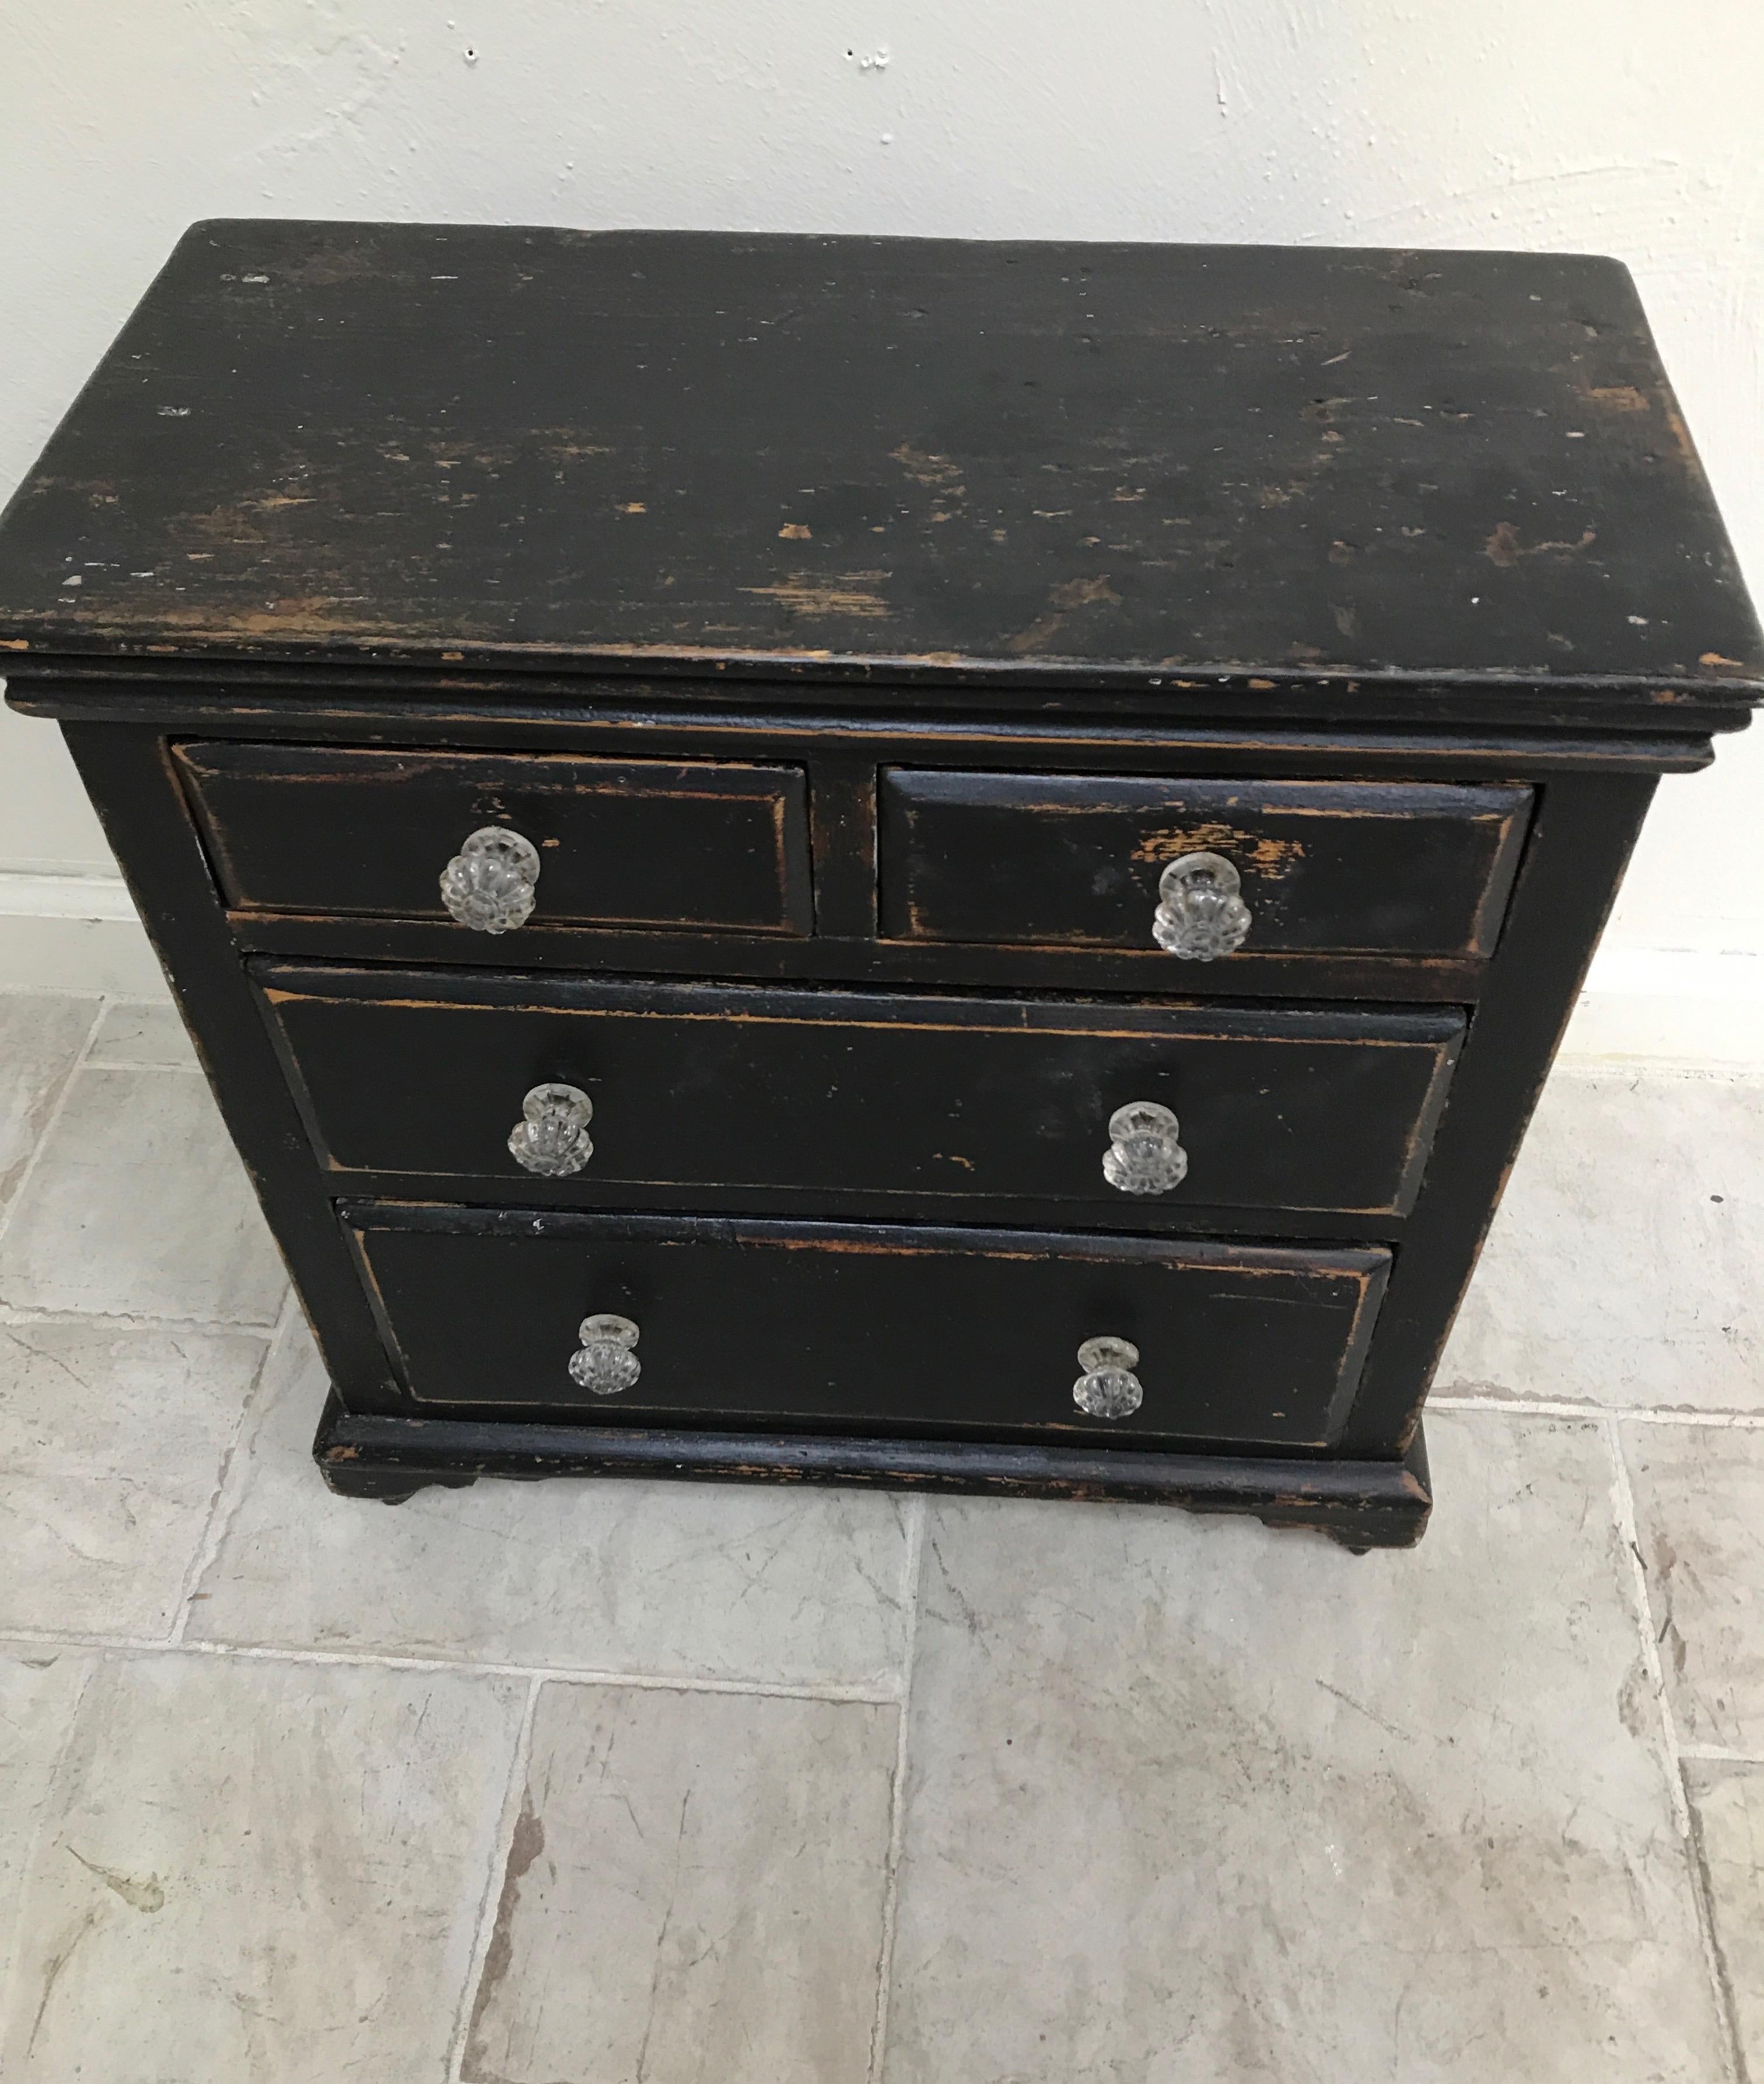 Miniature four-drawer Swedish chest with original paint and glass knobs.